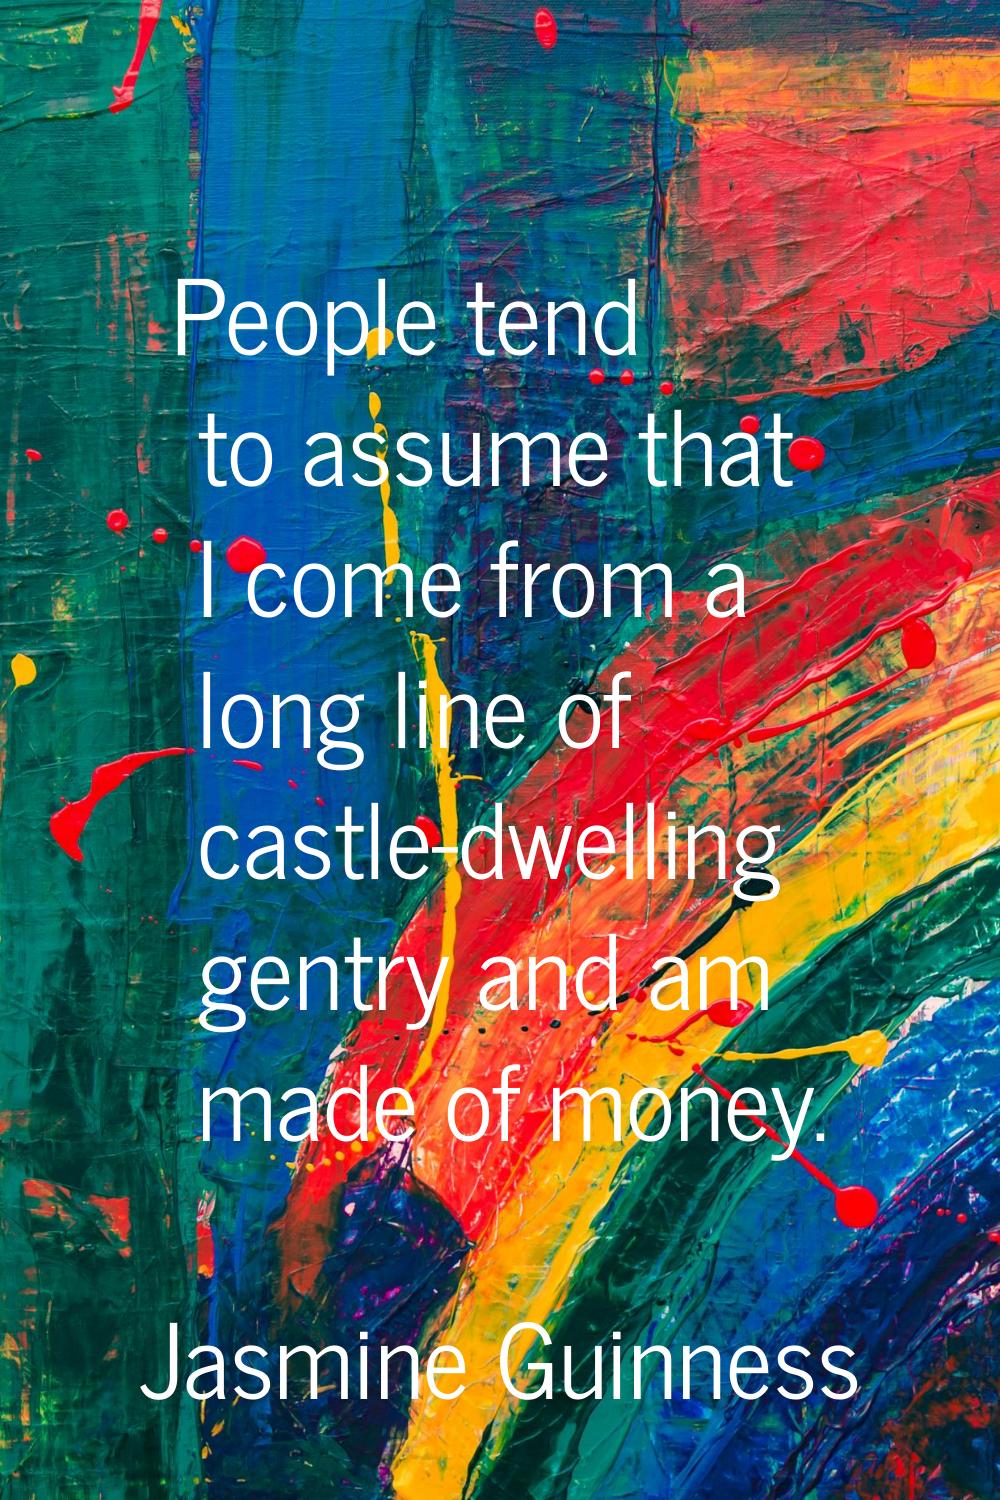 People tend to assume that I come from a long line of castle-dwelling gentry and am made of money.